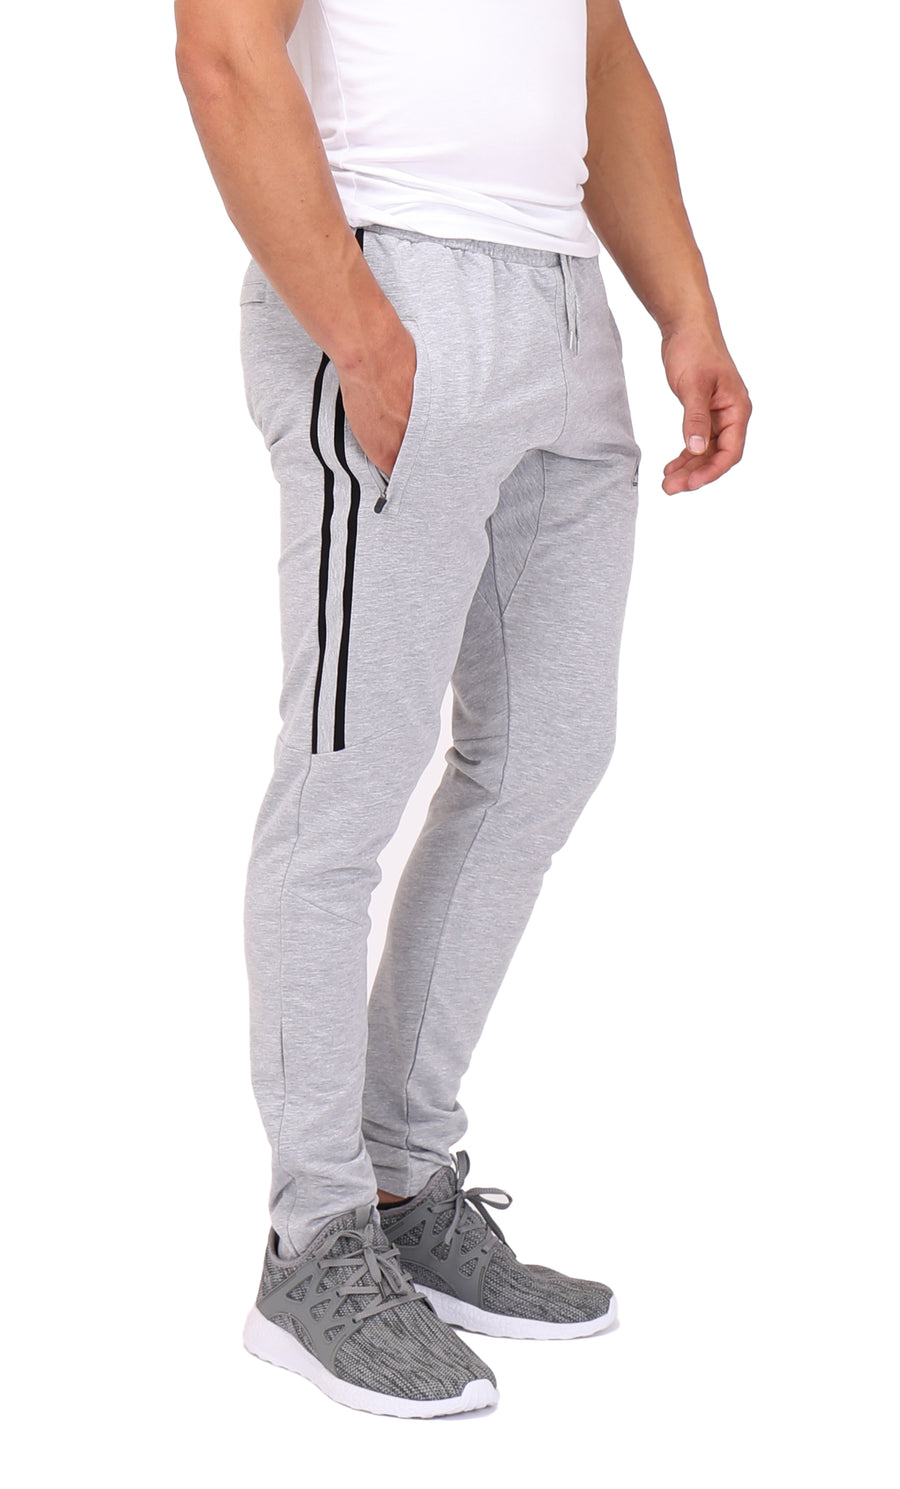 Durtebeua Casual Pants For Men Relaxed Fit Joggers Pants Workout Tapered  Sweatpants Track Pants - Walmart.com